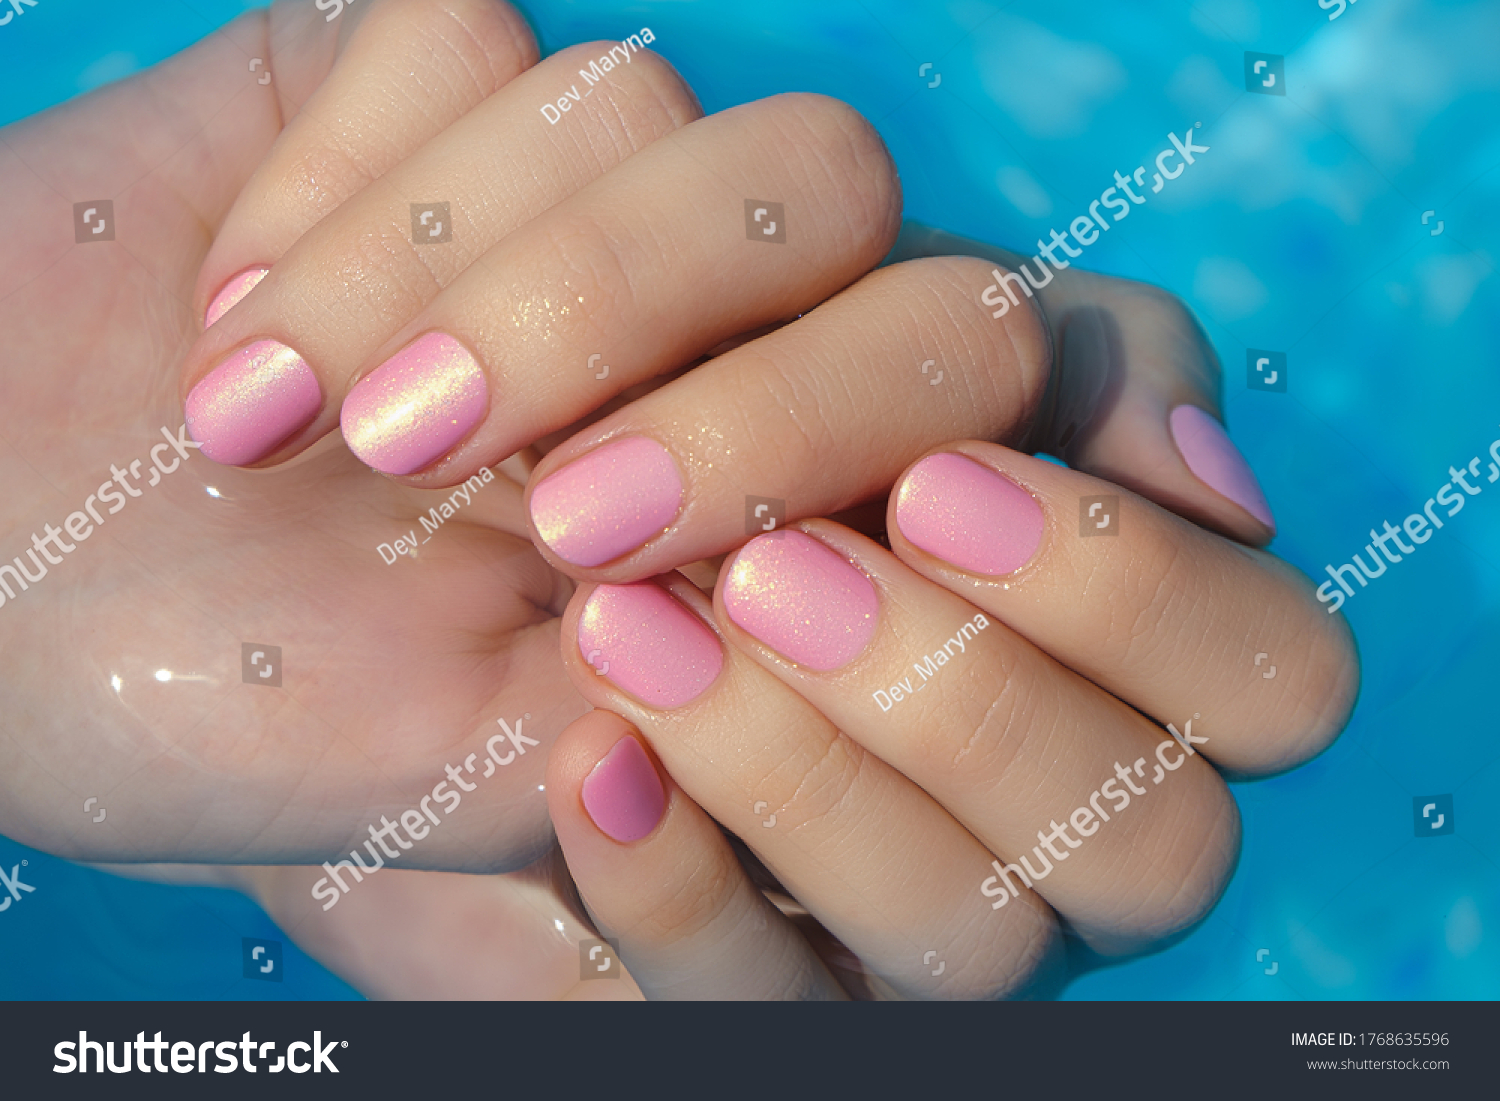 3. Pink and White French Tip Nails - wide 3